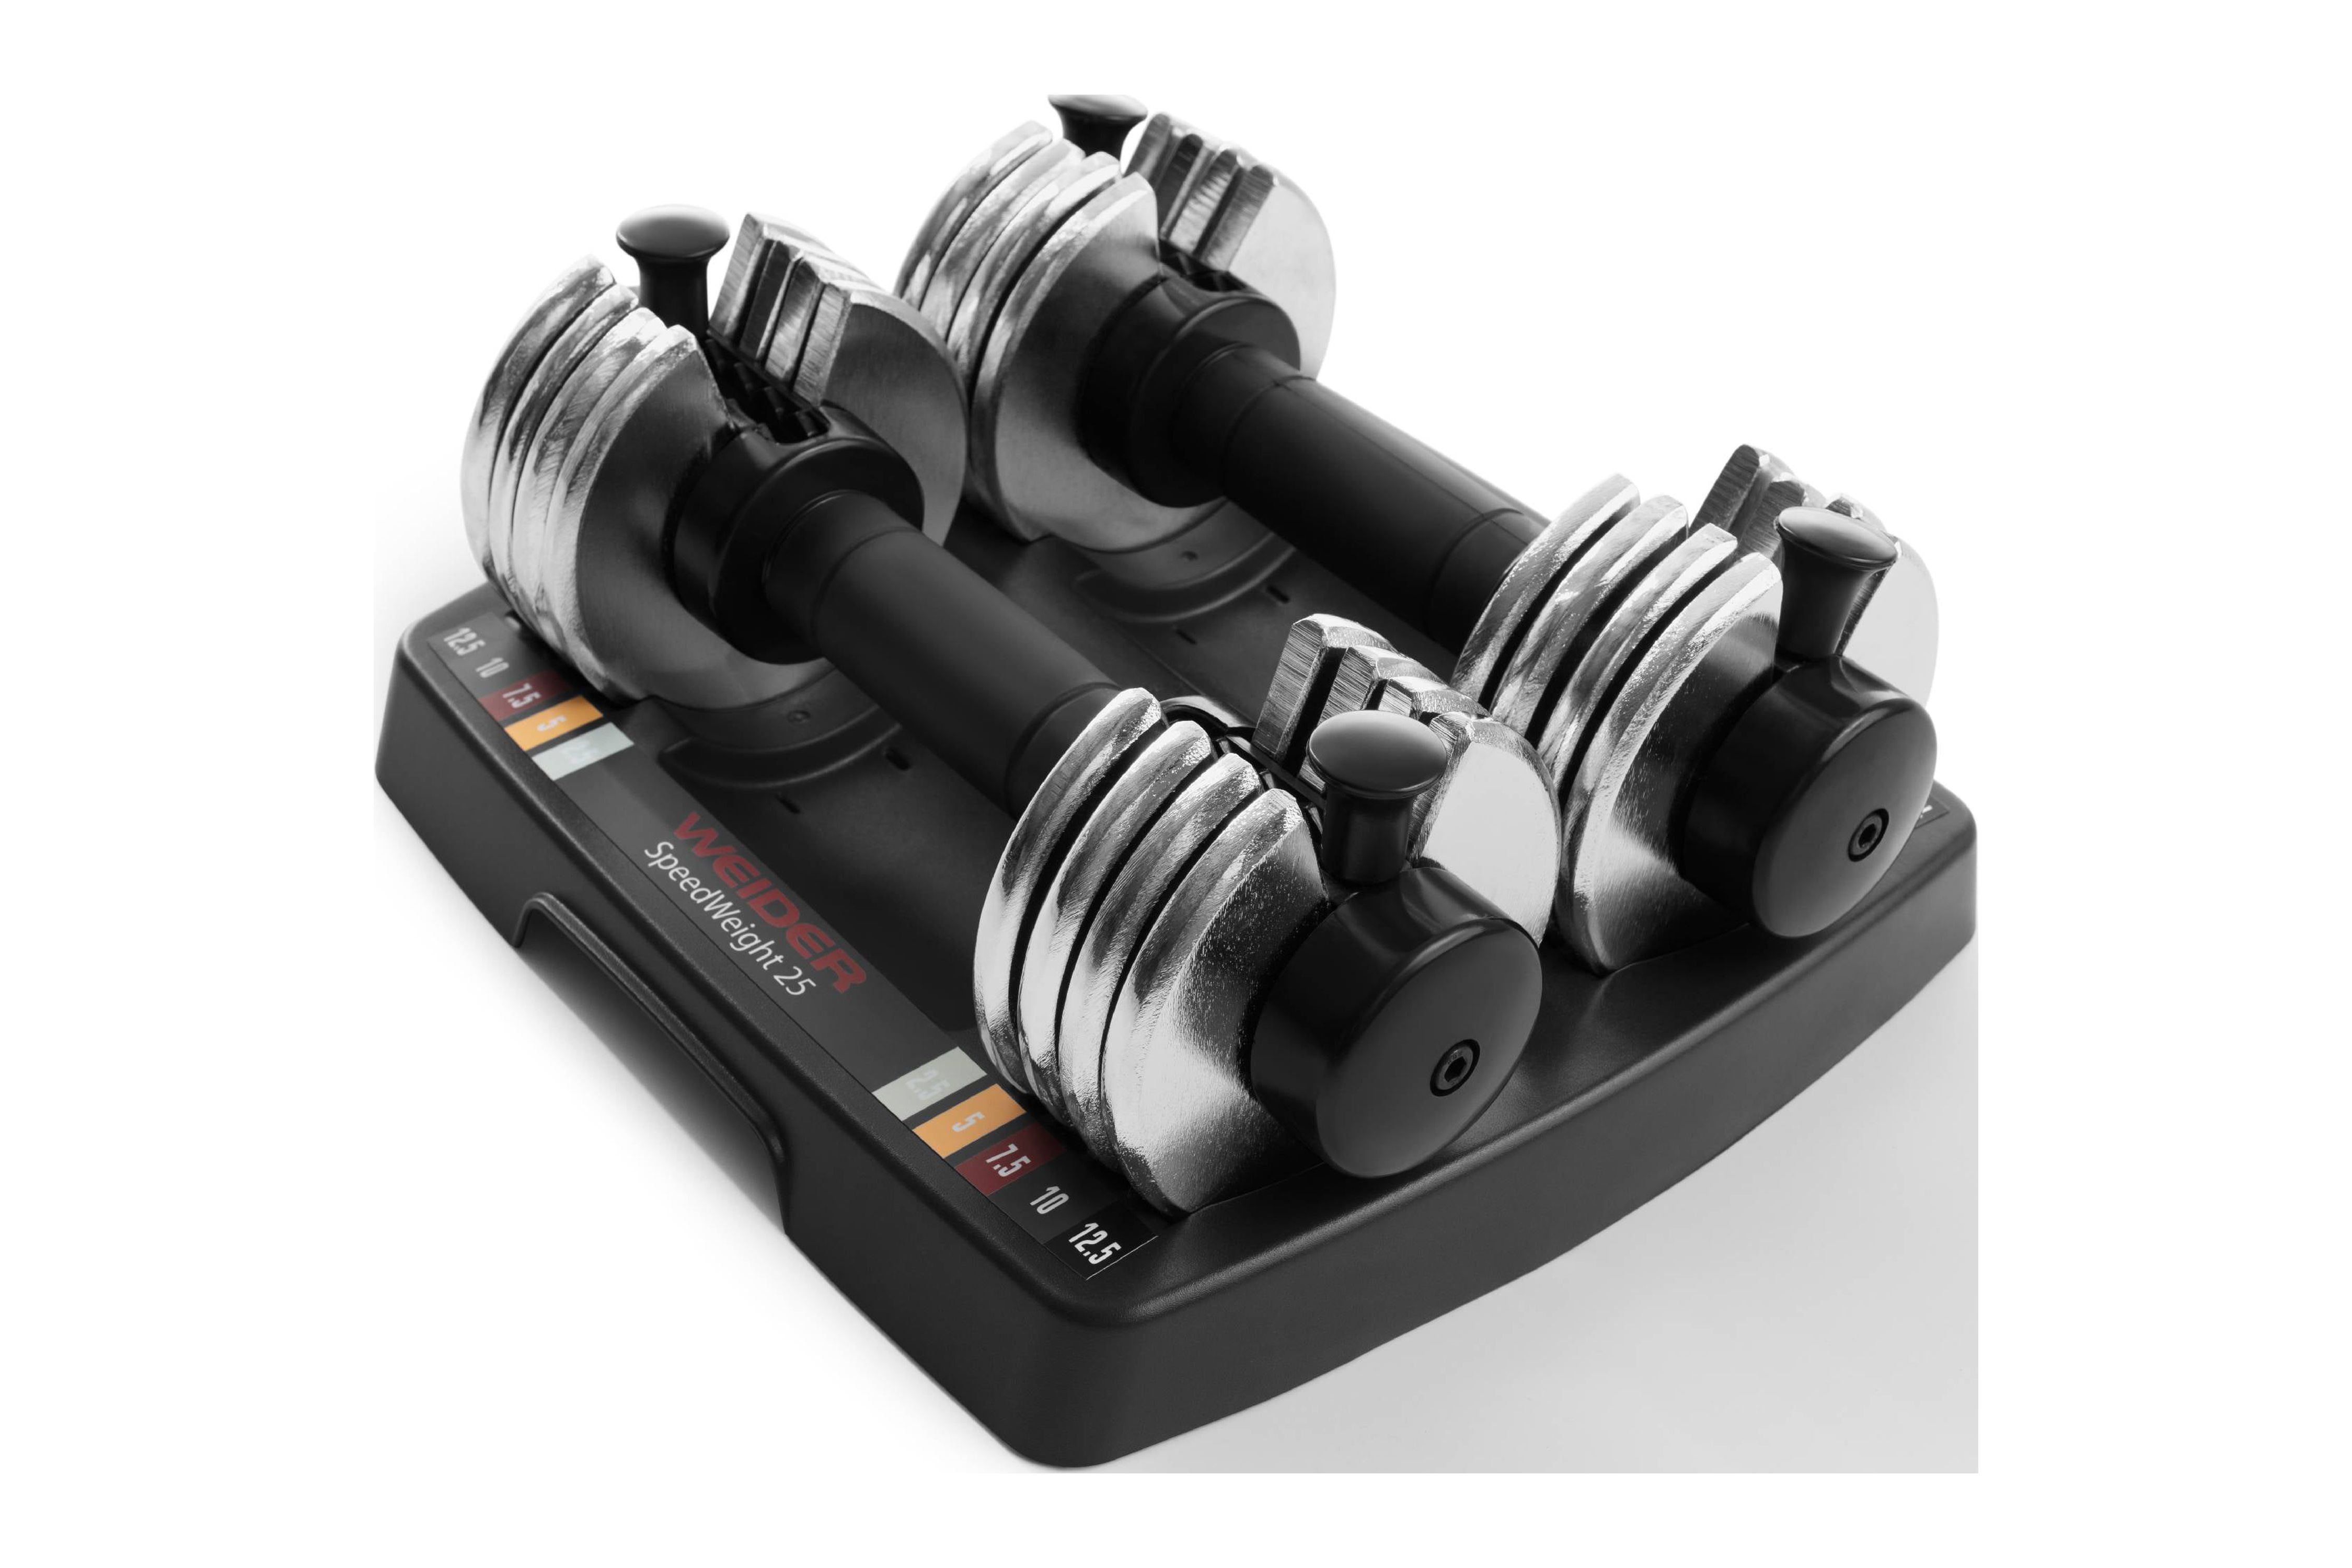 Weider 12.5 Lb. Adjustable SpeedWeight Dumbbells, Pair with Storage Tray - image 1 of 13